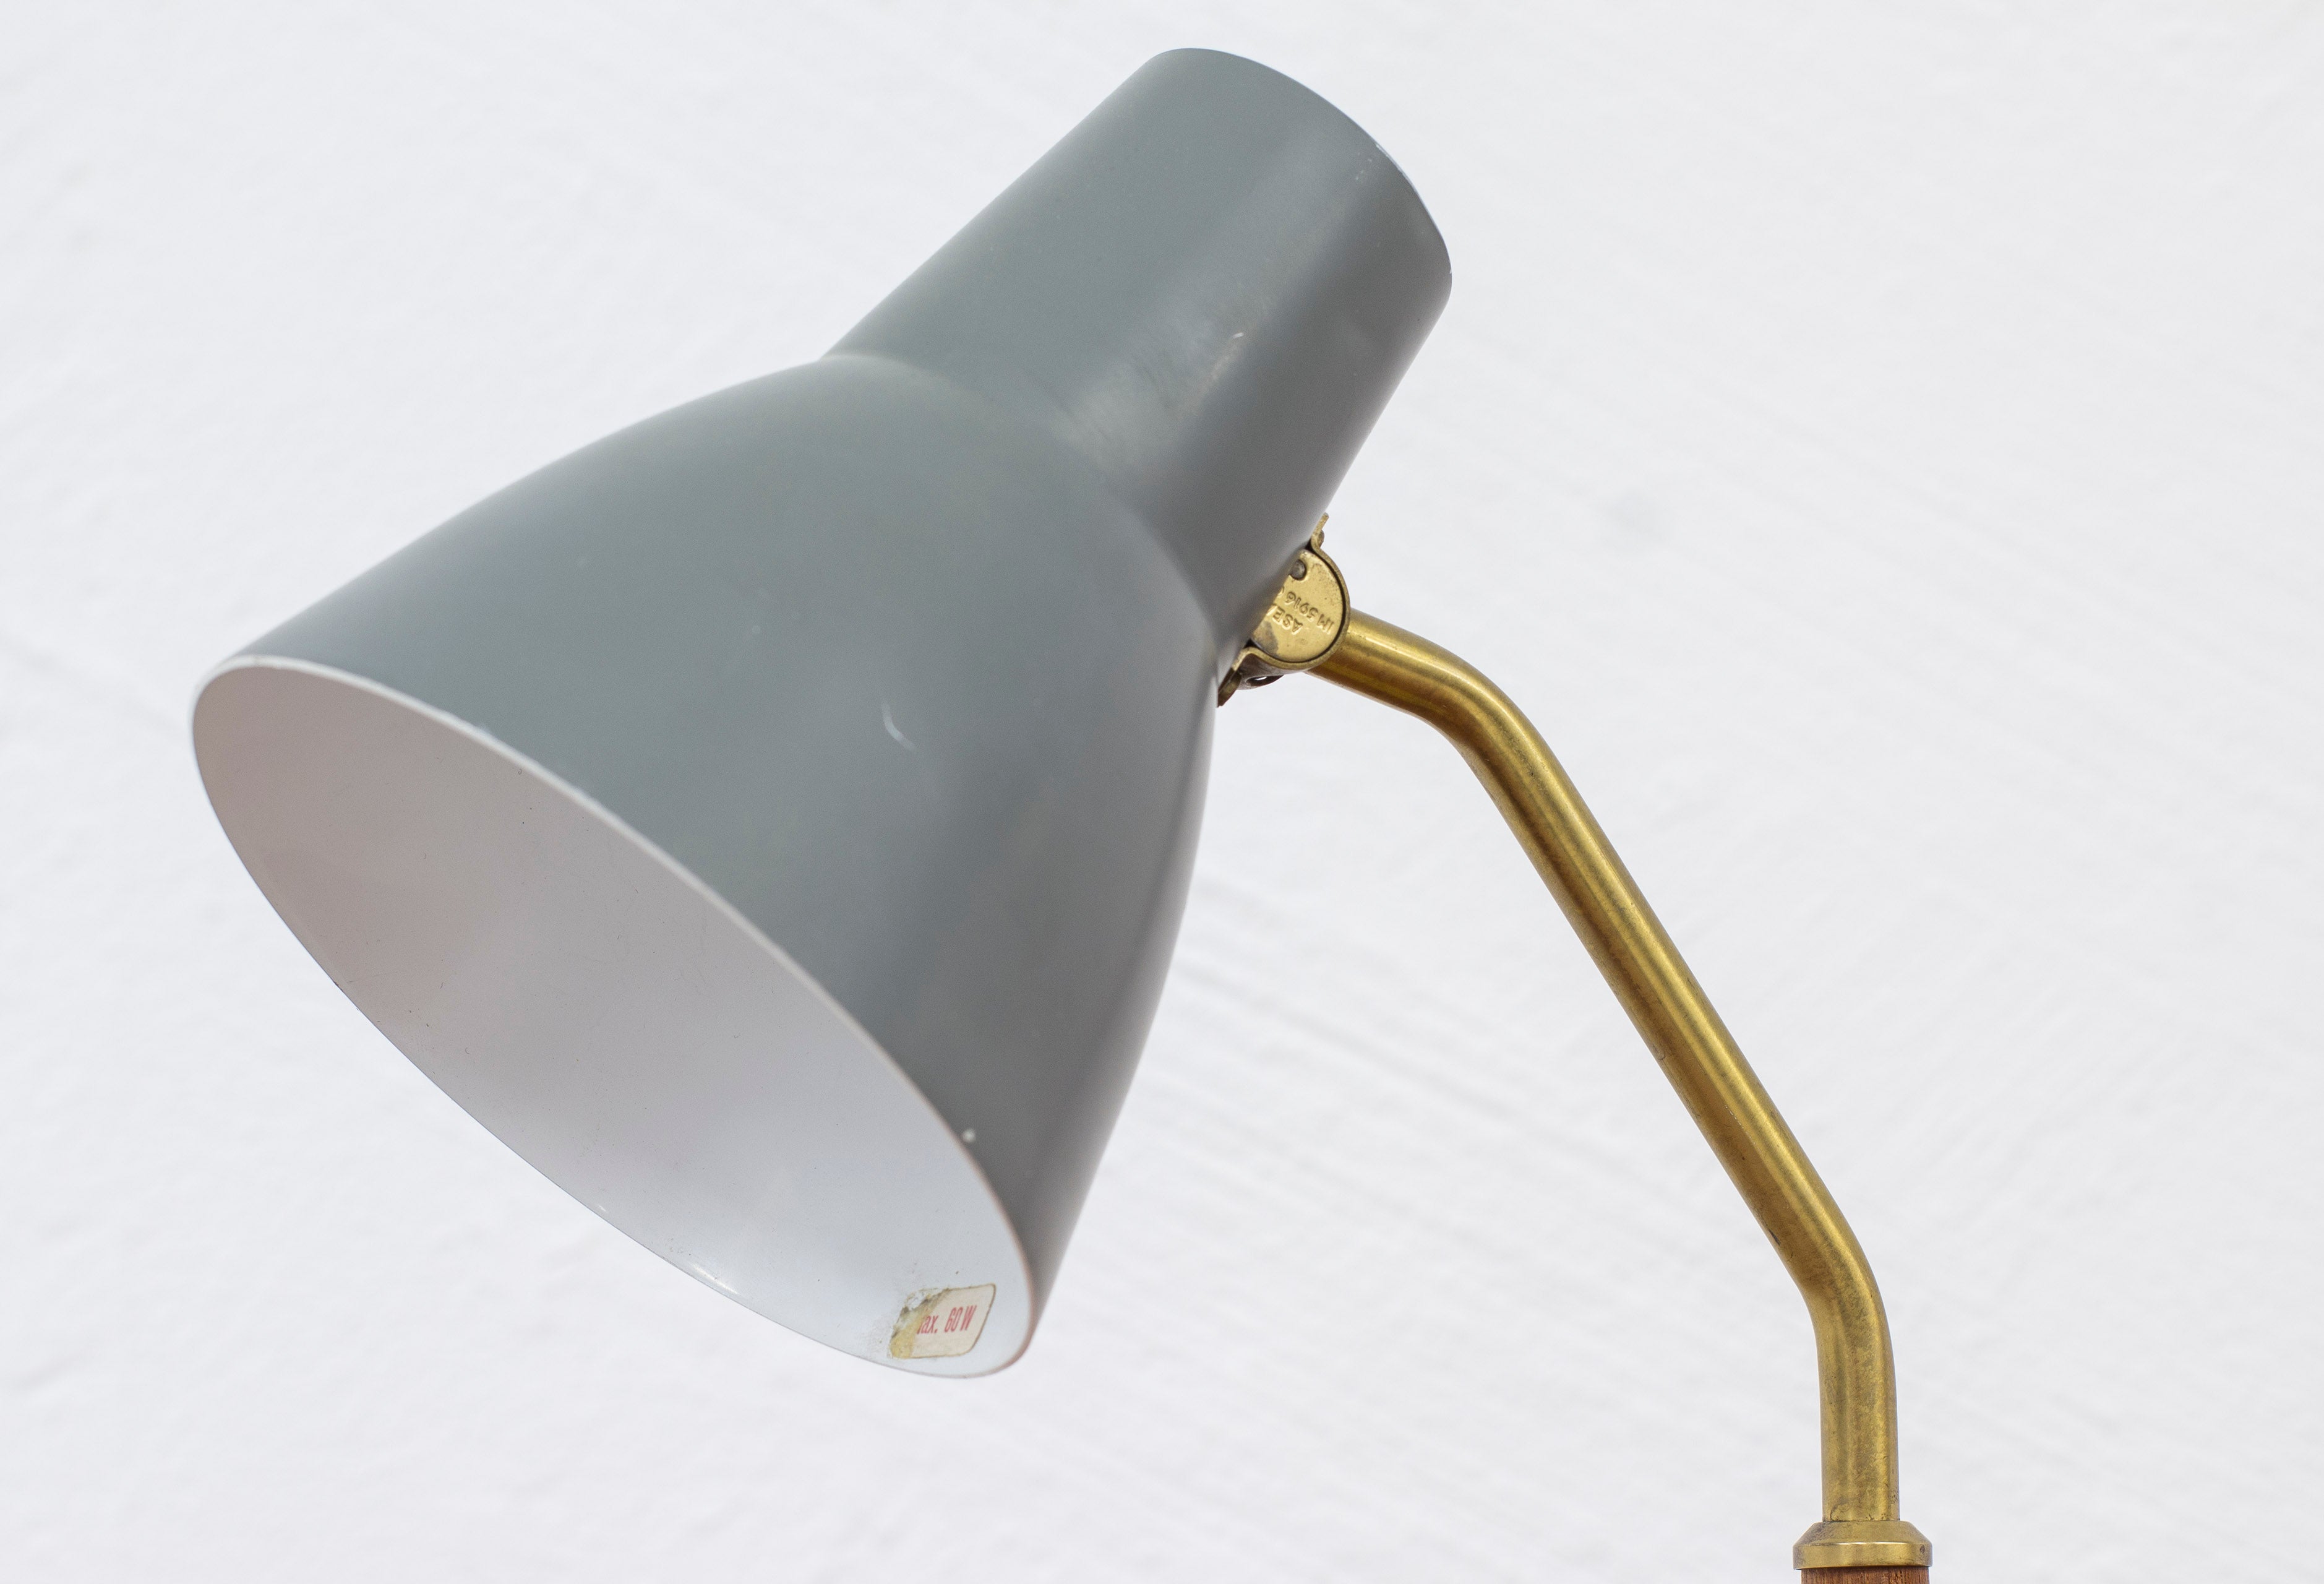 Table lamp by ASEA